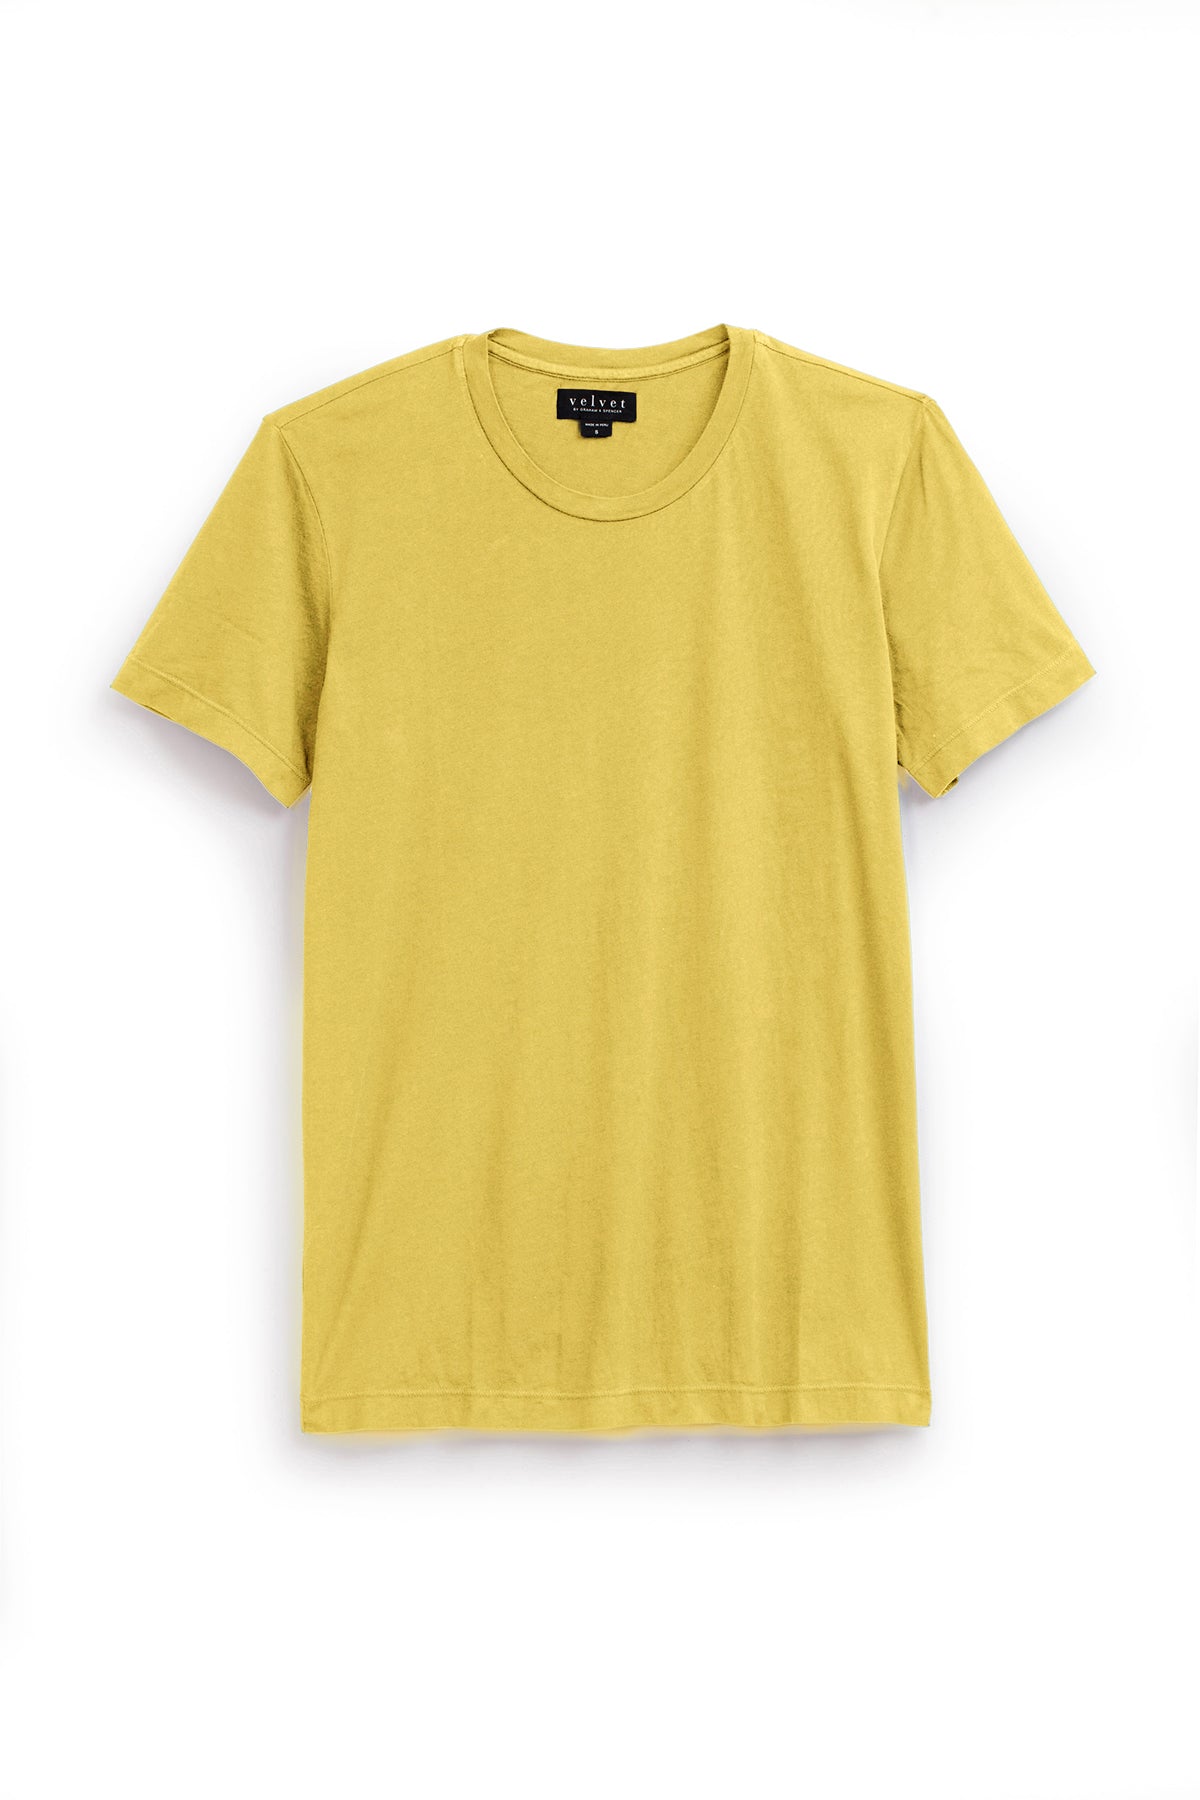   A Velvet by Graham & Spencer yellow HOWARD WHISPER CLASSIC CREW NECK TEE with a vintage-feel softness on a white background. 